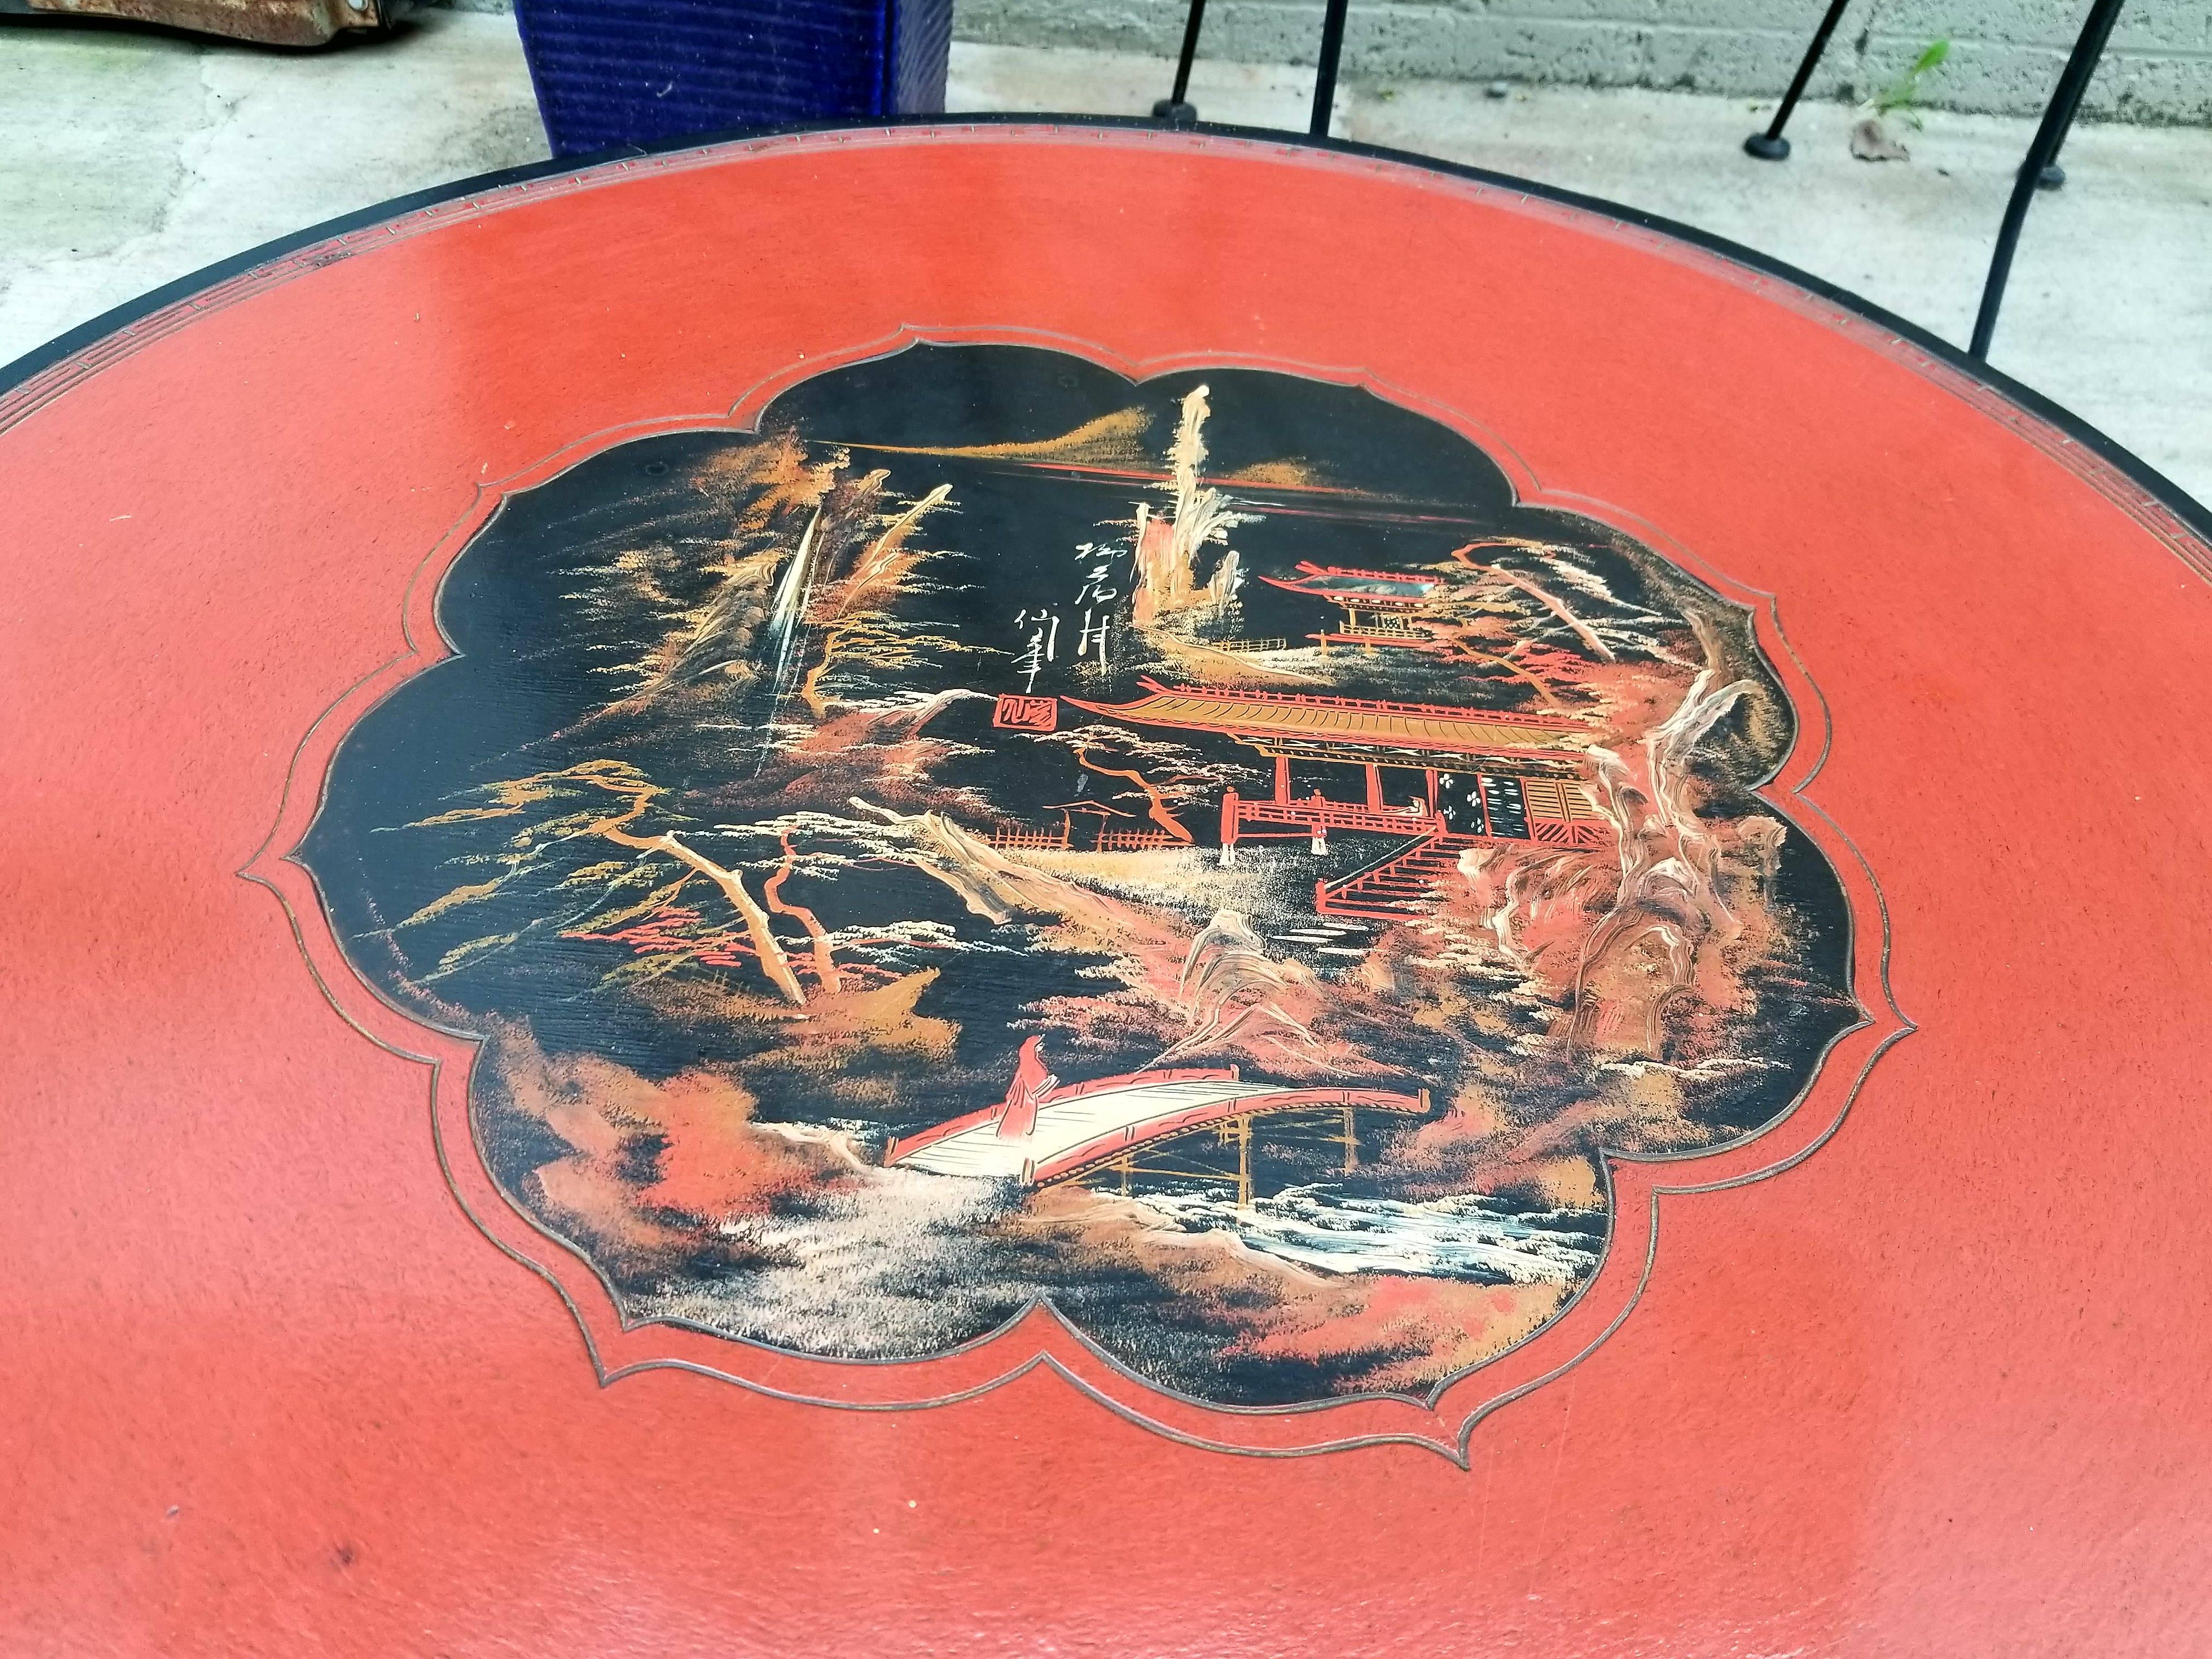 A red and black lacquer circular coffee table with a hand painted landscape and village scene. Mother-of-pearl inlay detail. Carved apron and legs, mid-20th century.